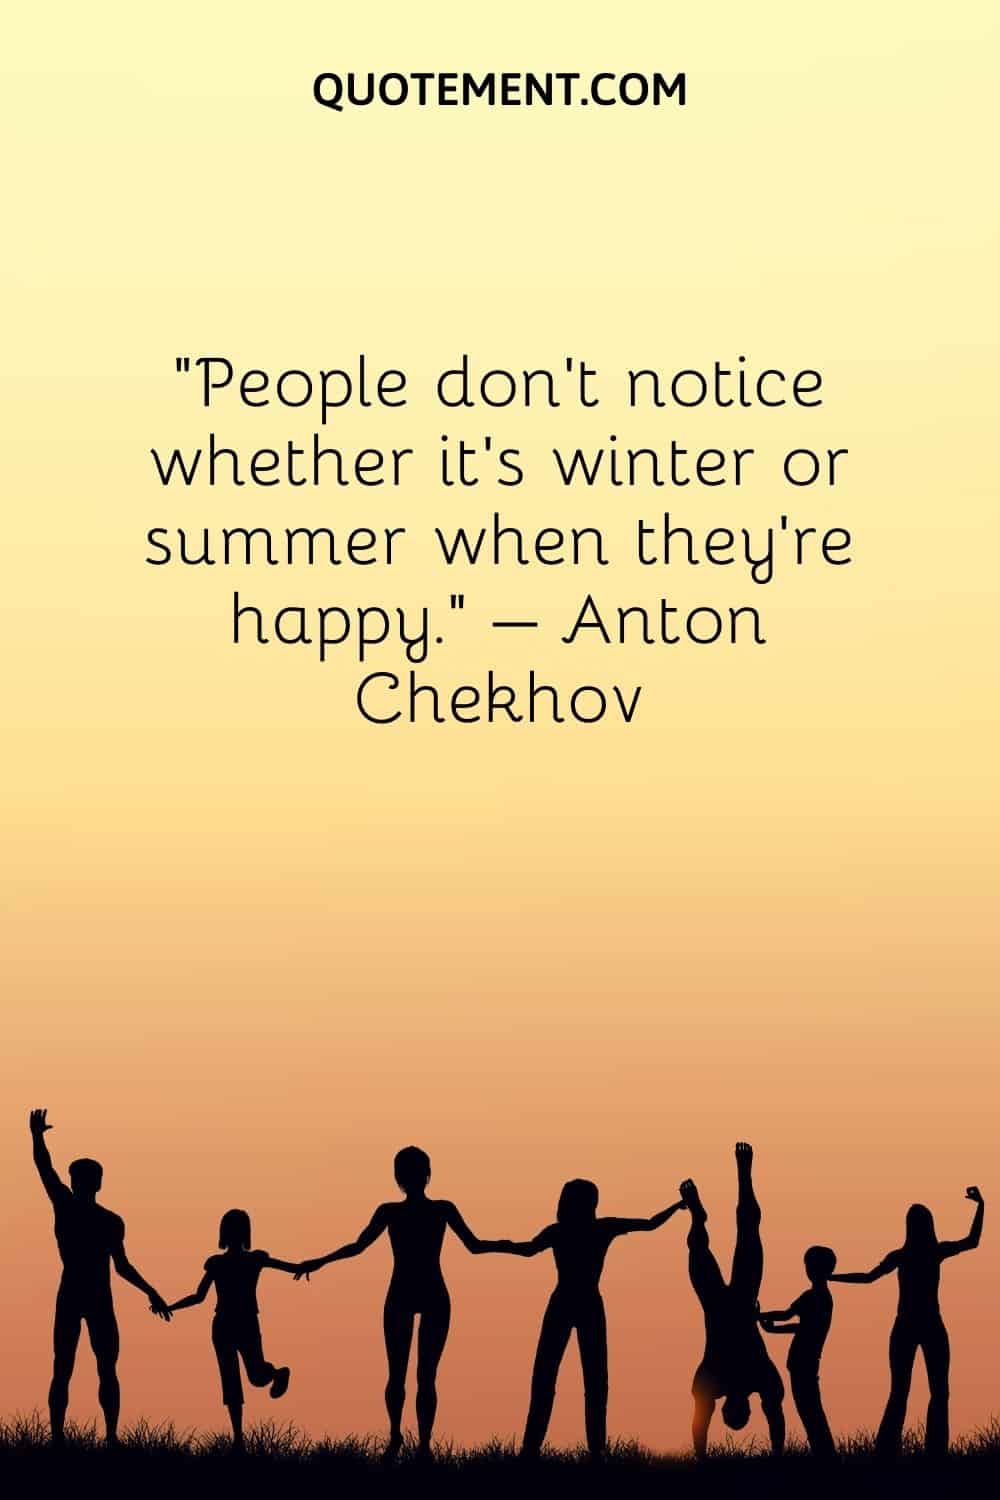 People don’t notice whether it’s winter or summer when they’re happy.